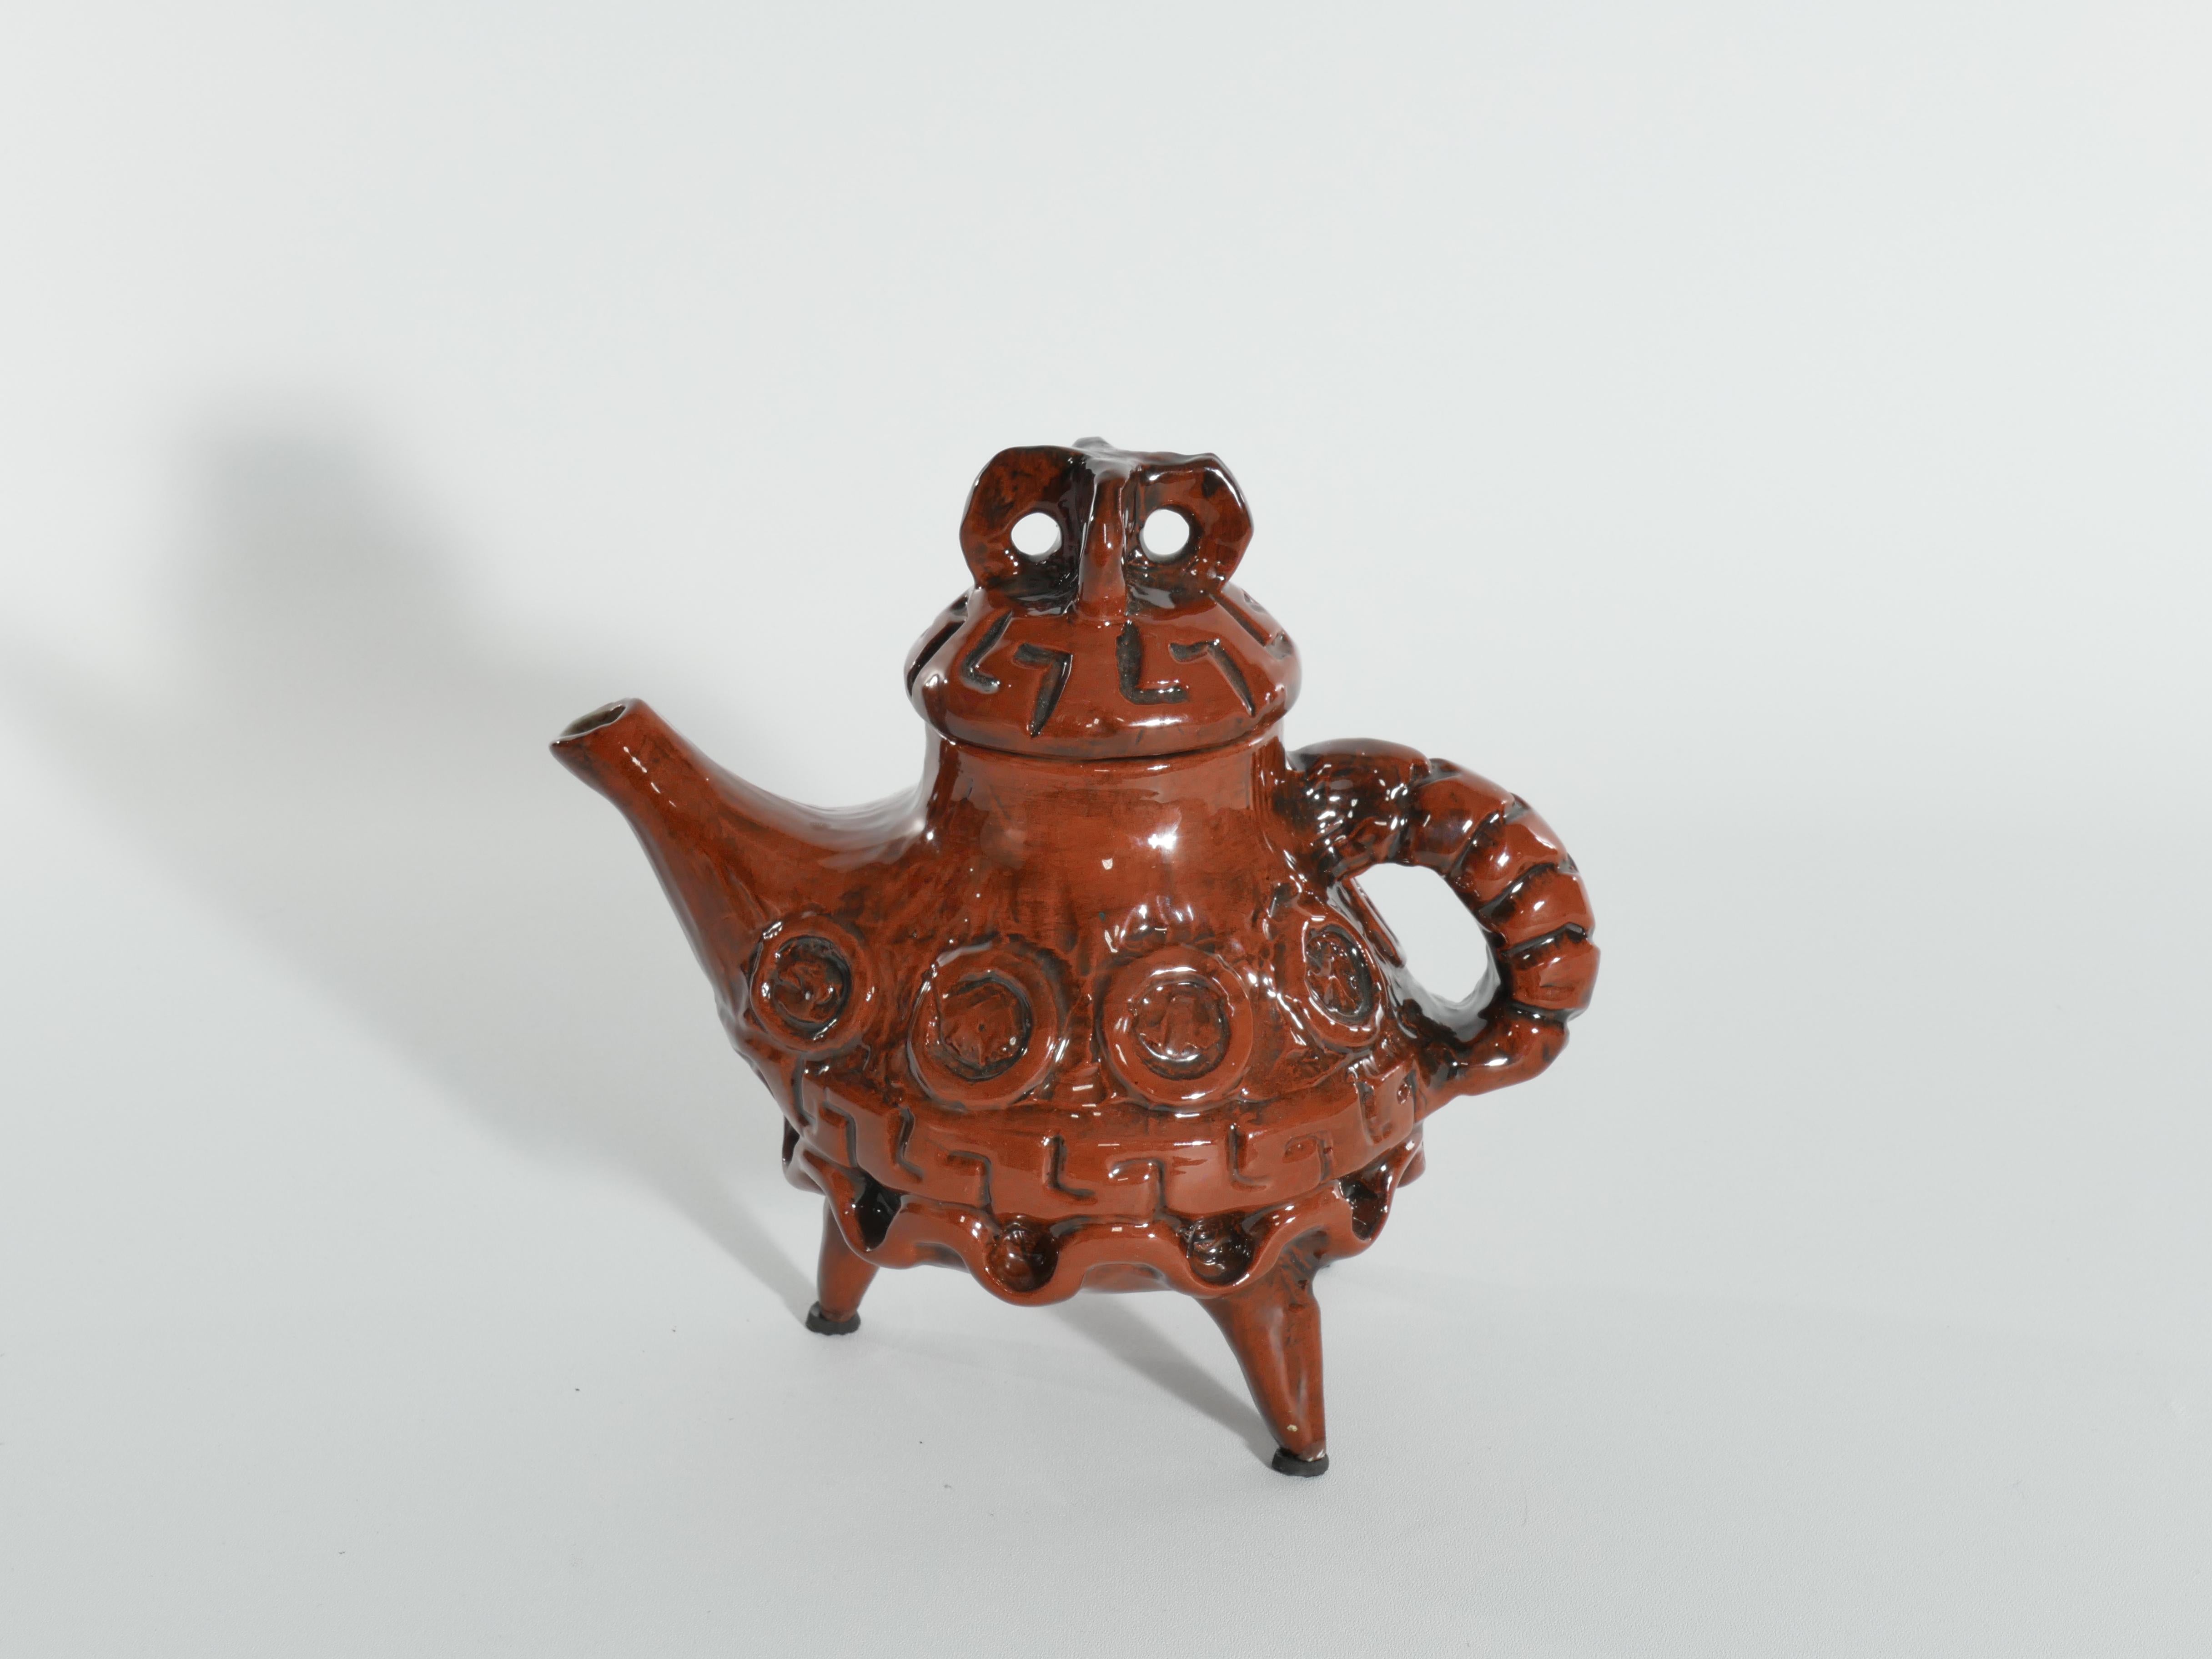 Vintage Playful Teapot with Crab-like Features by Allan Hellman Sweden 1982  For Sale 5